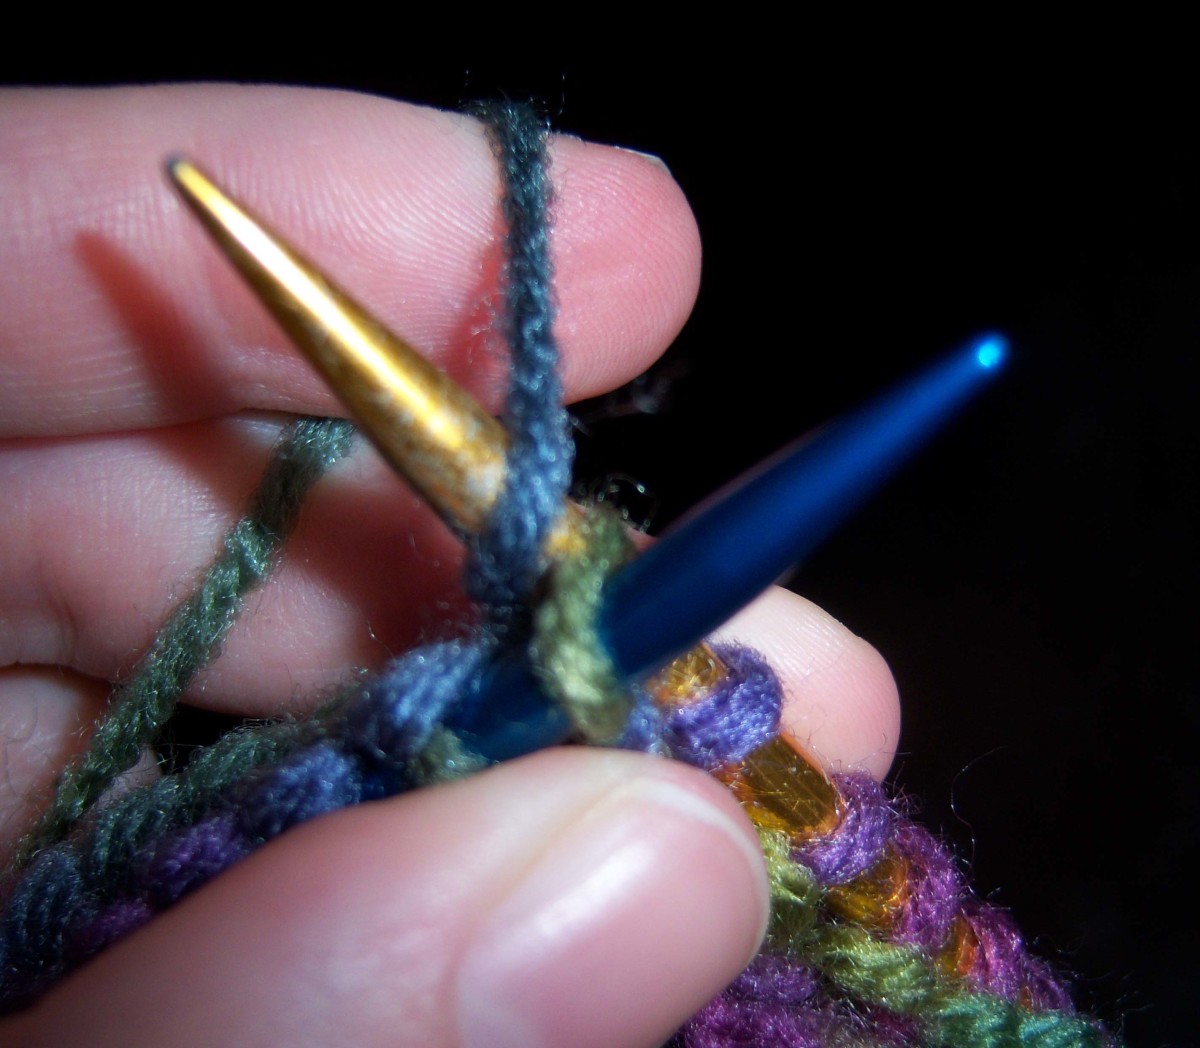 Instead of letting the stitch slip from the blue needle, insert the gold needle through the loop of yarn behind the blue needle and knit one stitch.